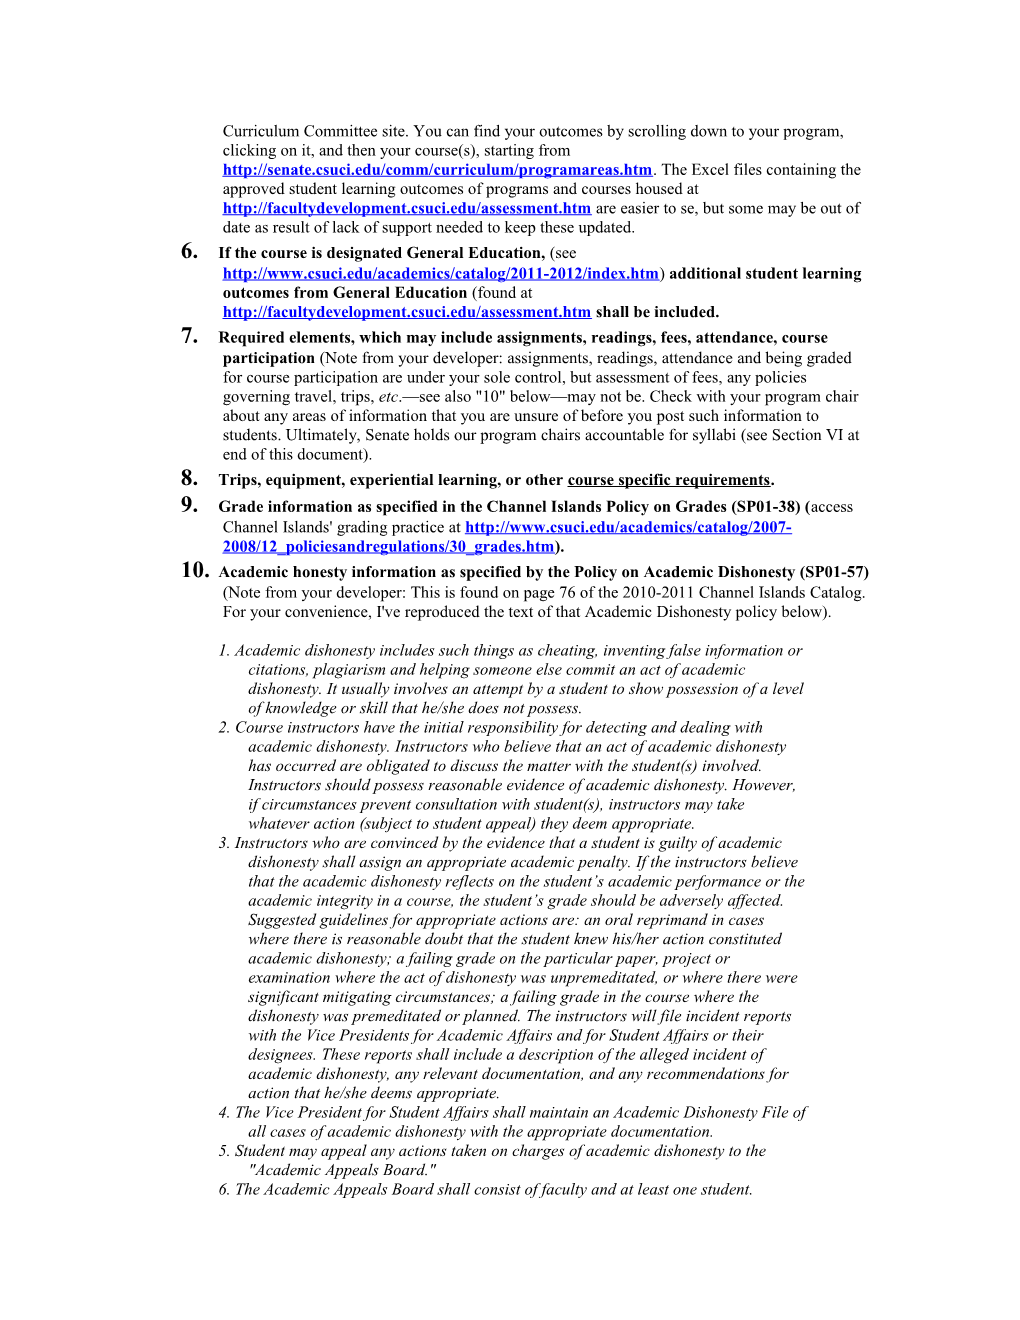 Support Document for Construction of CSU Channel Islands Syllabi